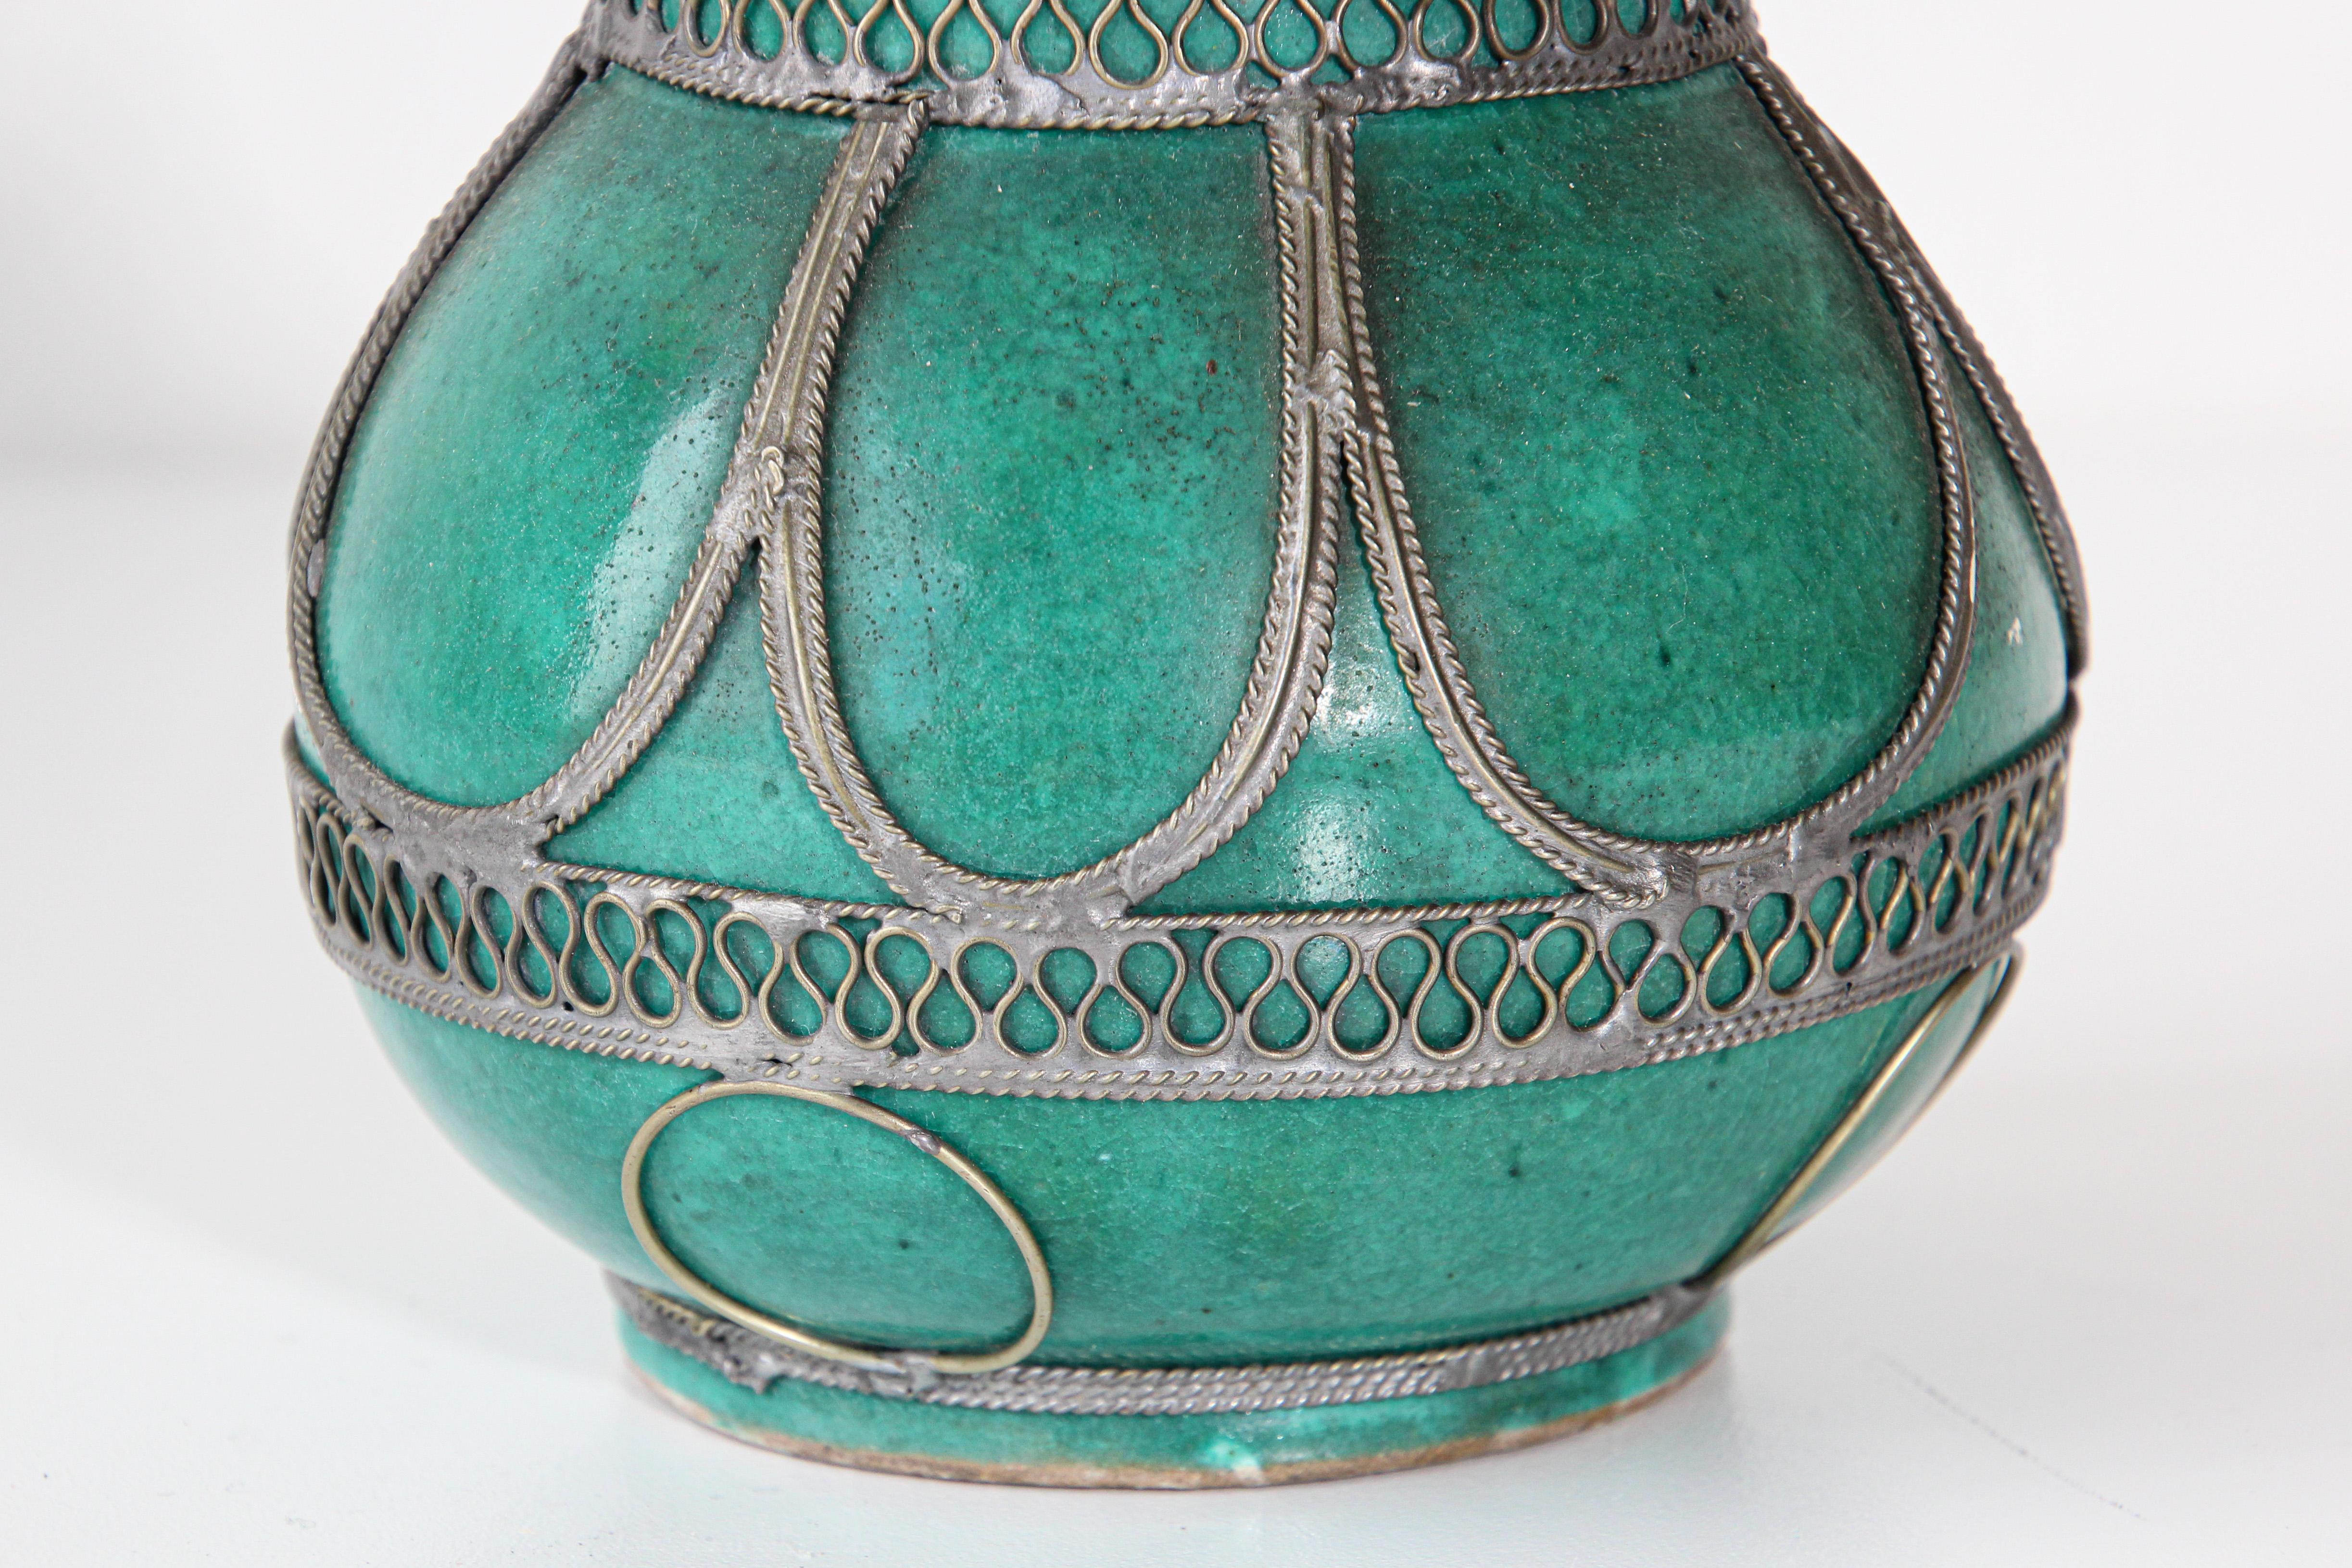 Hand-Crafted Moroccan Ceramic Covered Urn with Silver Filigree